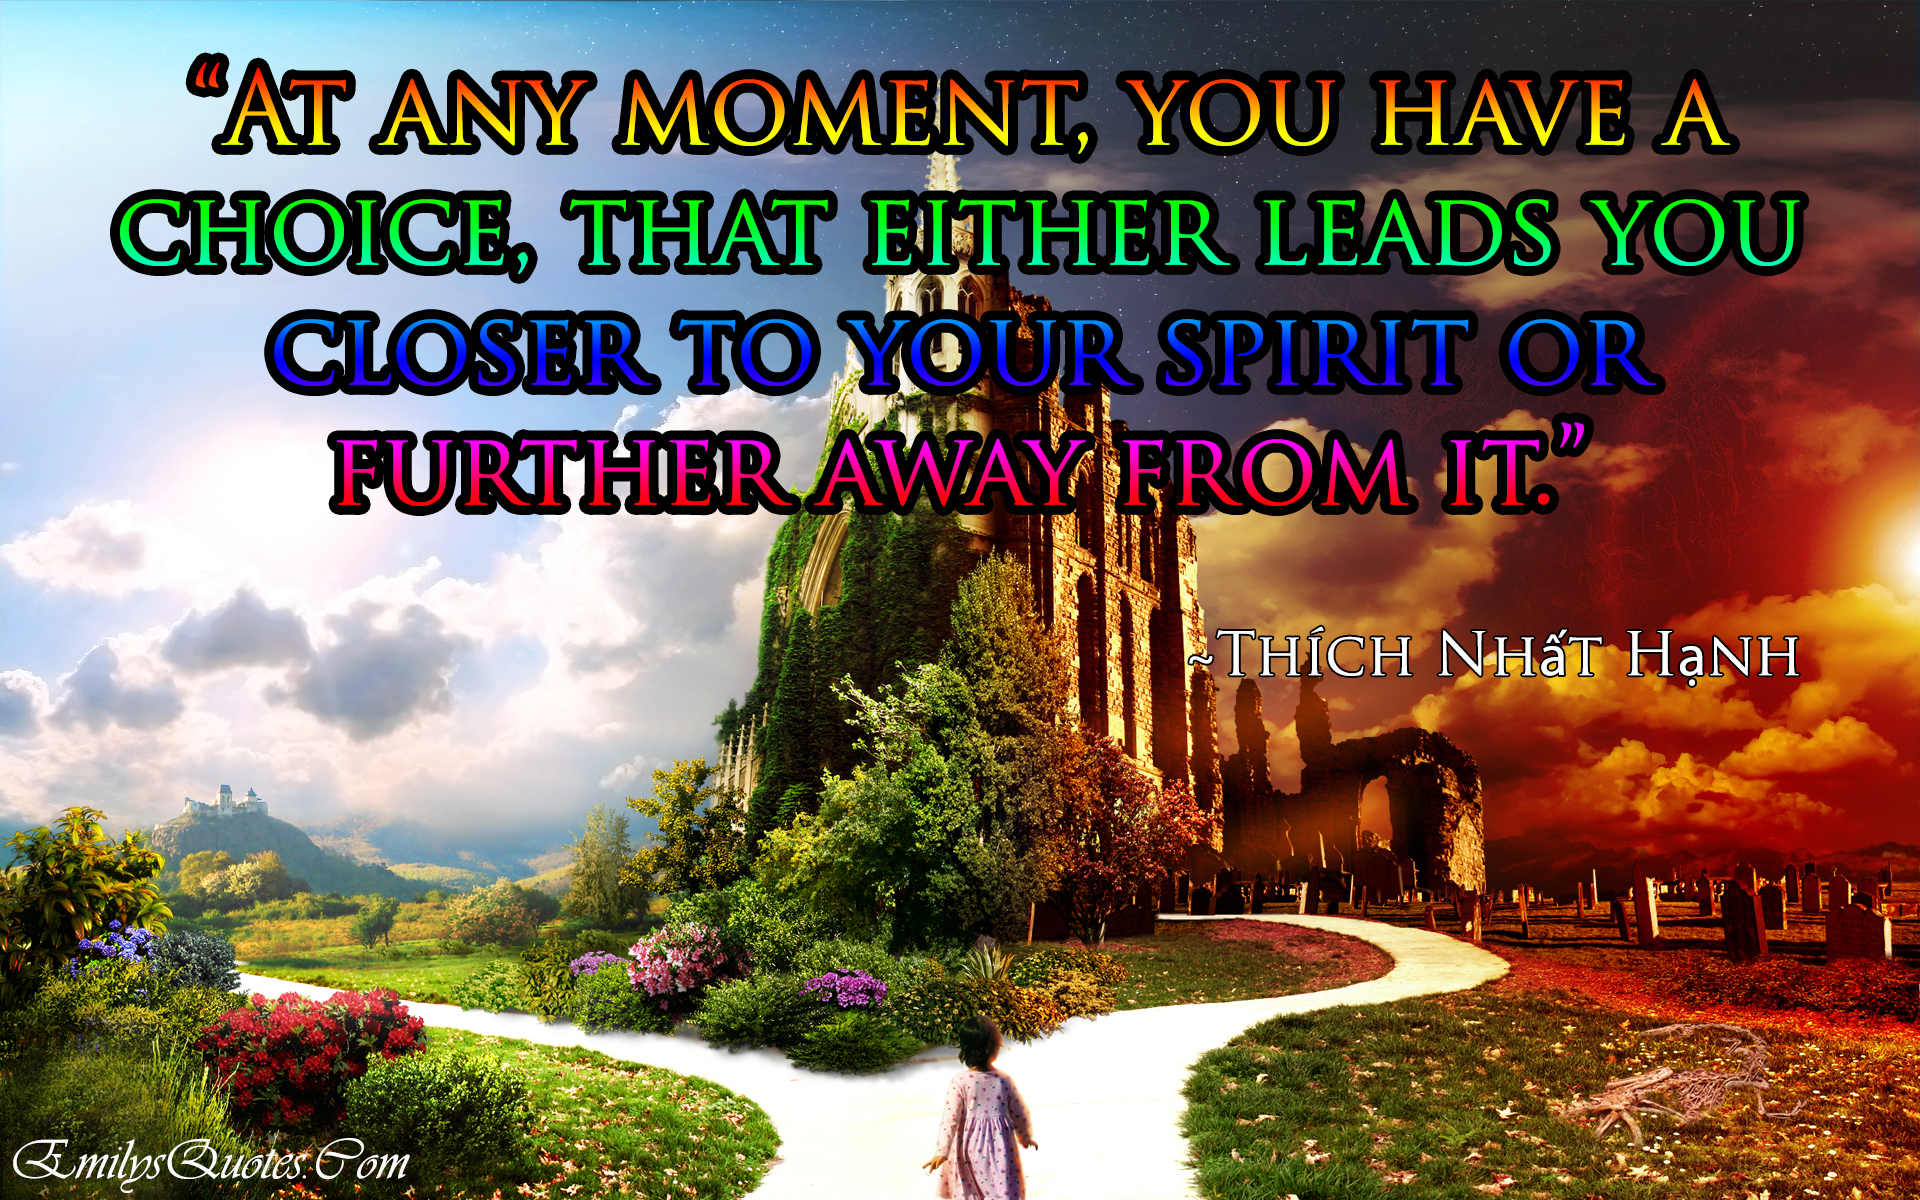 At any moment, you have a choice, that either leads you closer to your spirit or further away from it